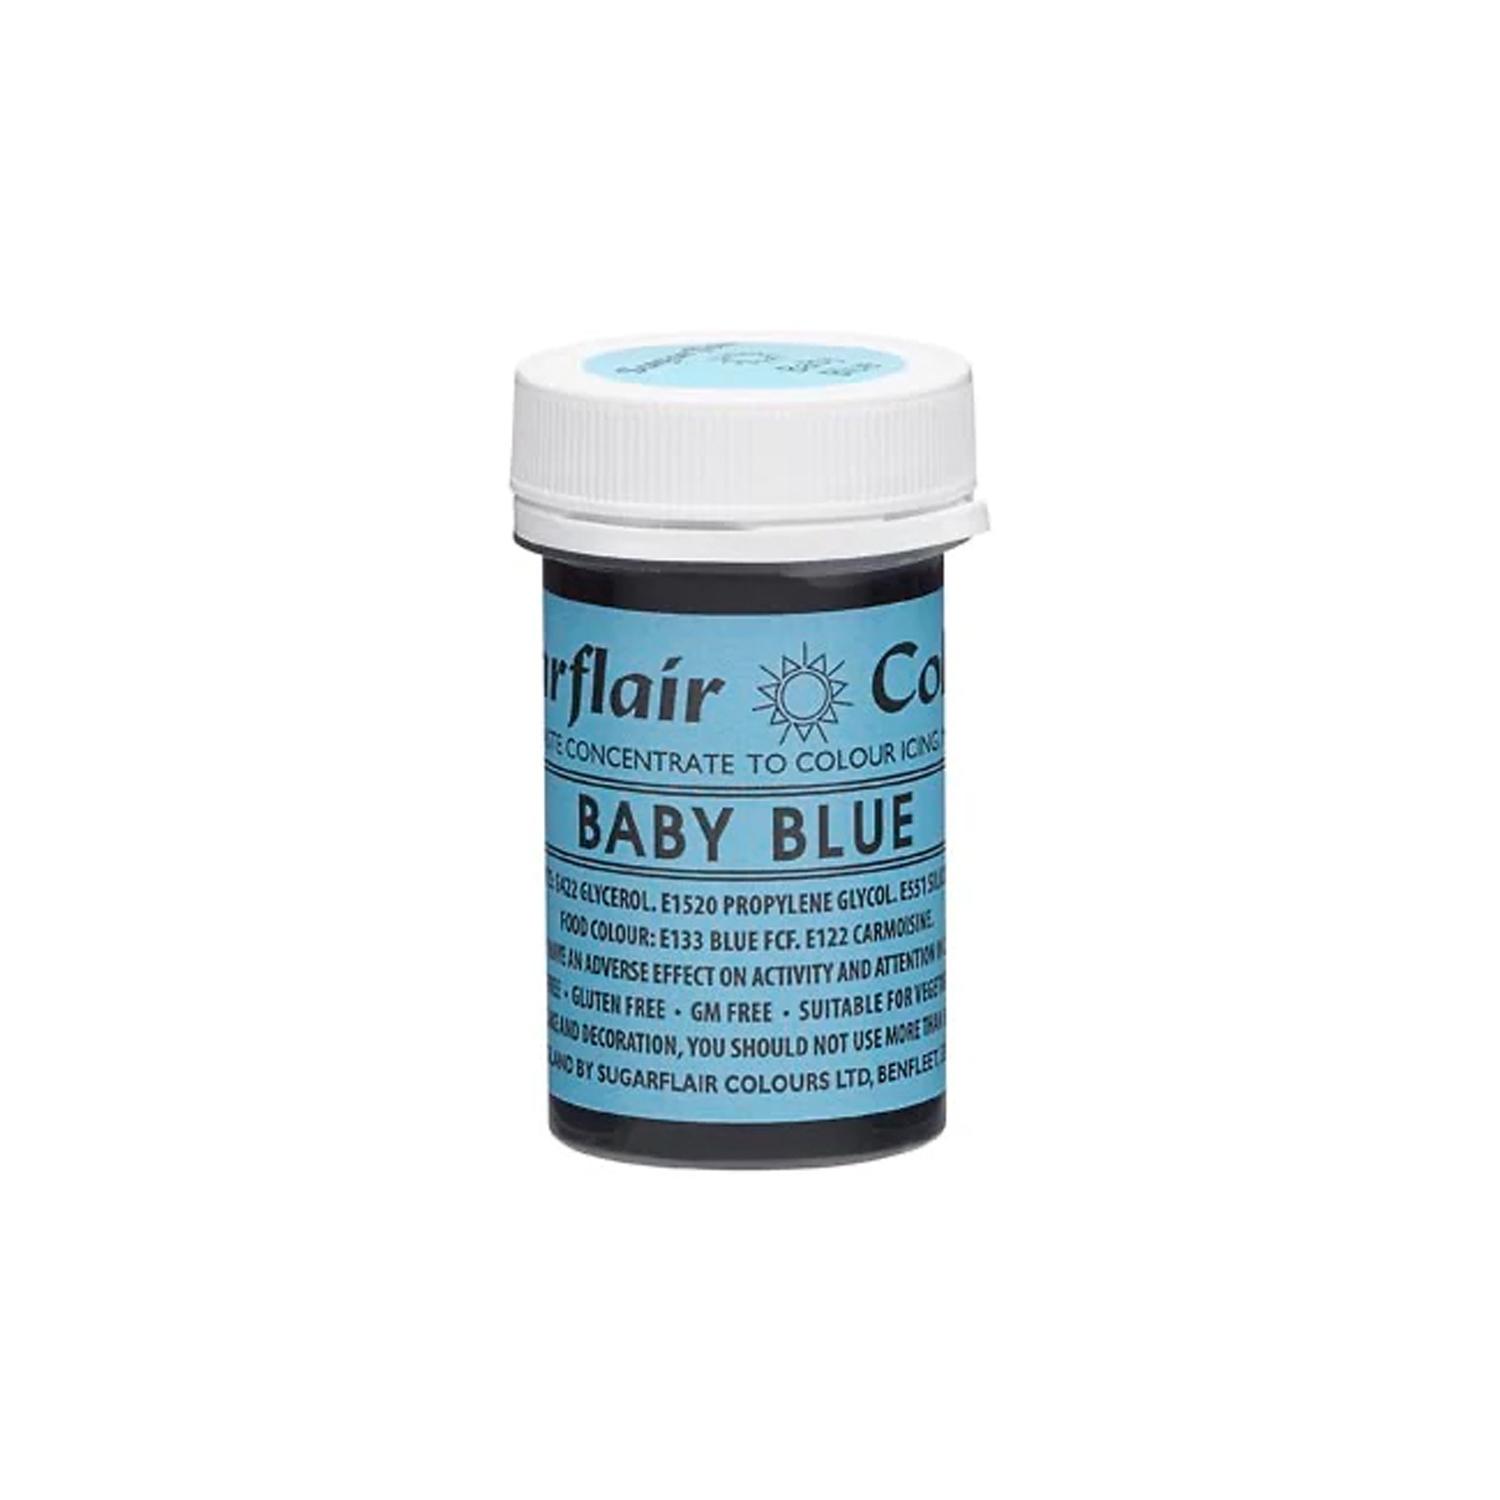 SUGARFLAIR COLOURS SPECTRAL PASTE BABY BLUE 25GMS